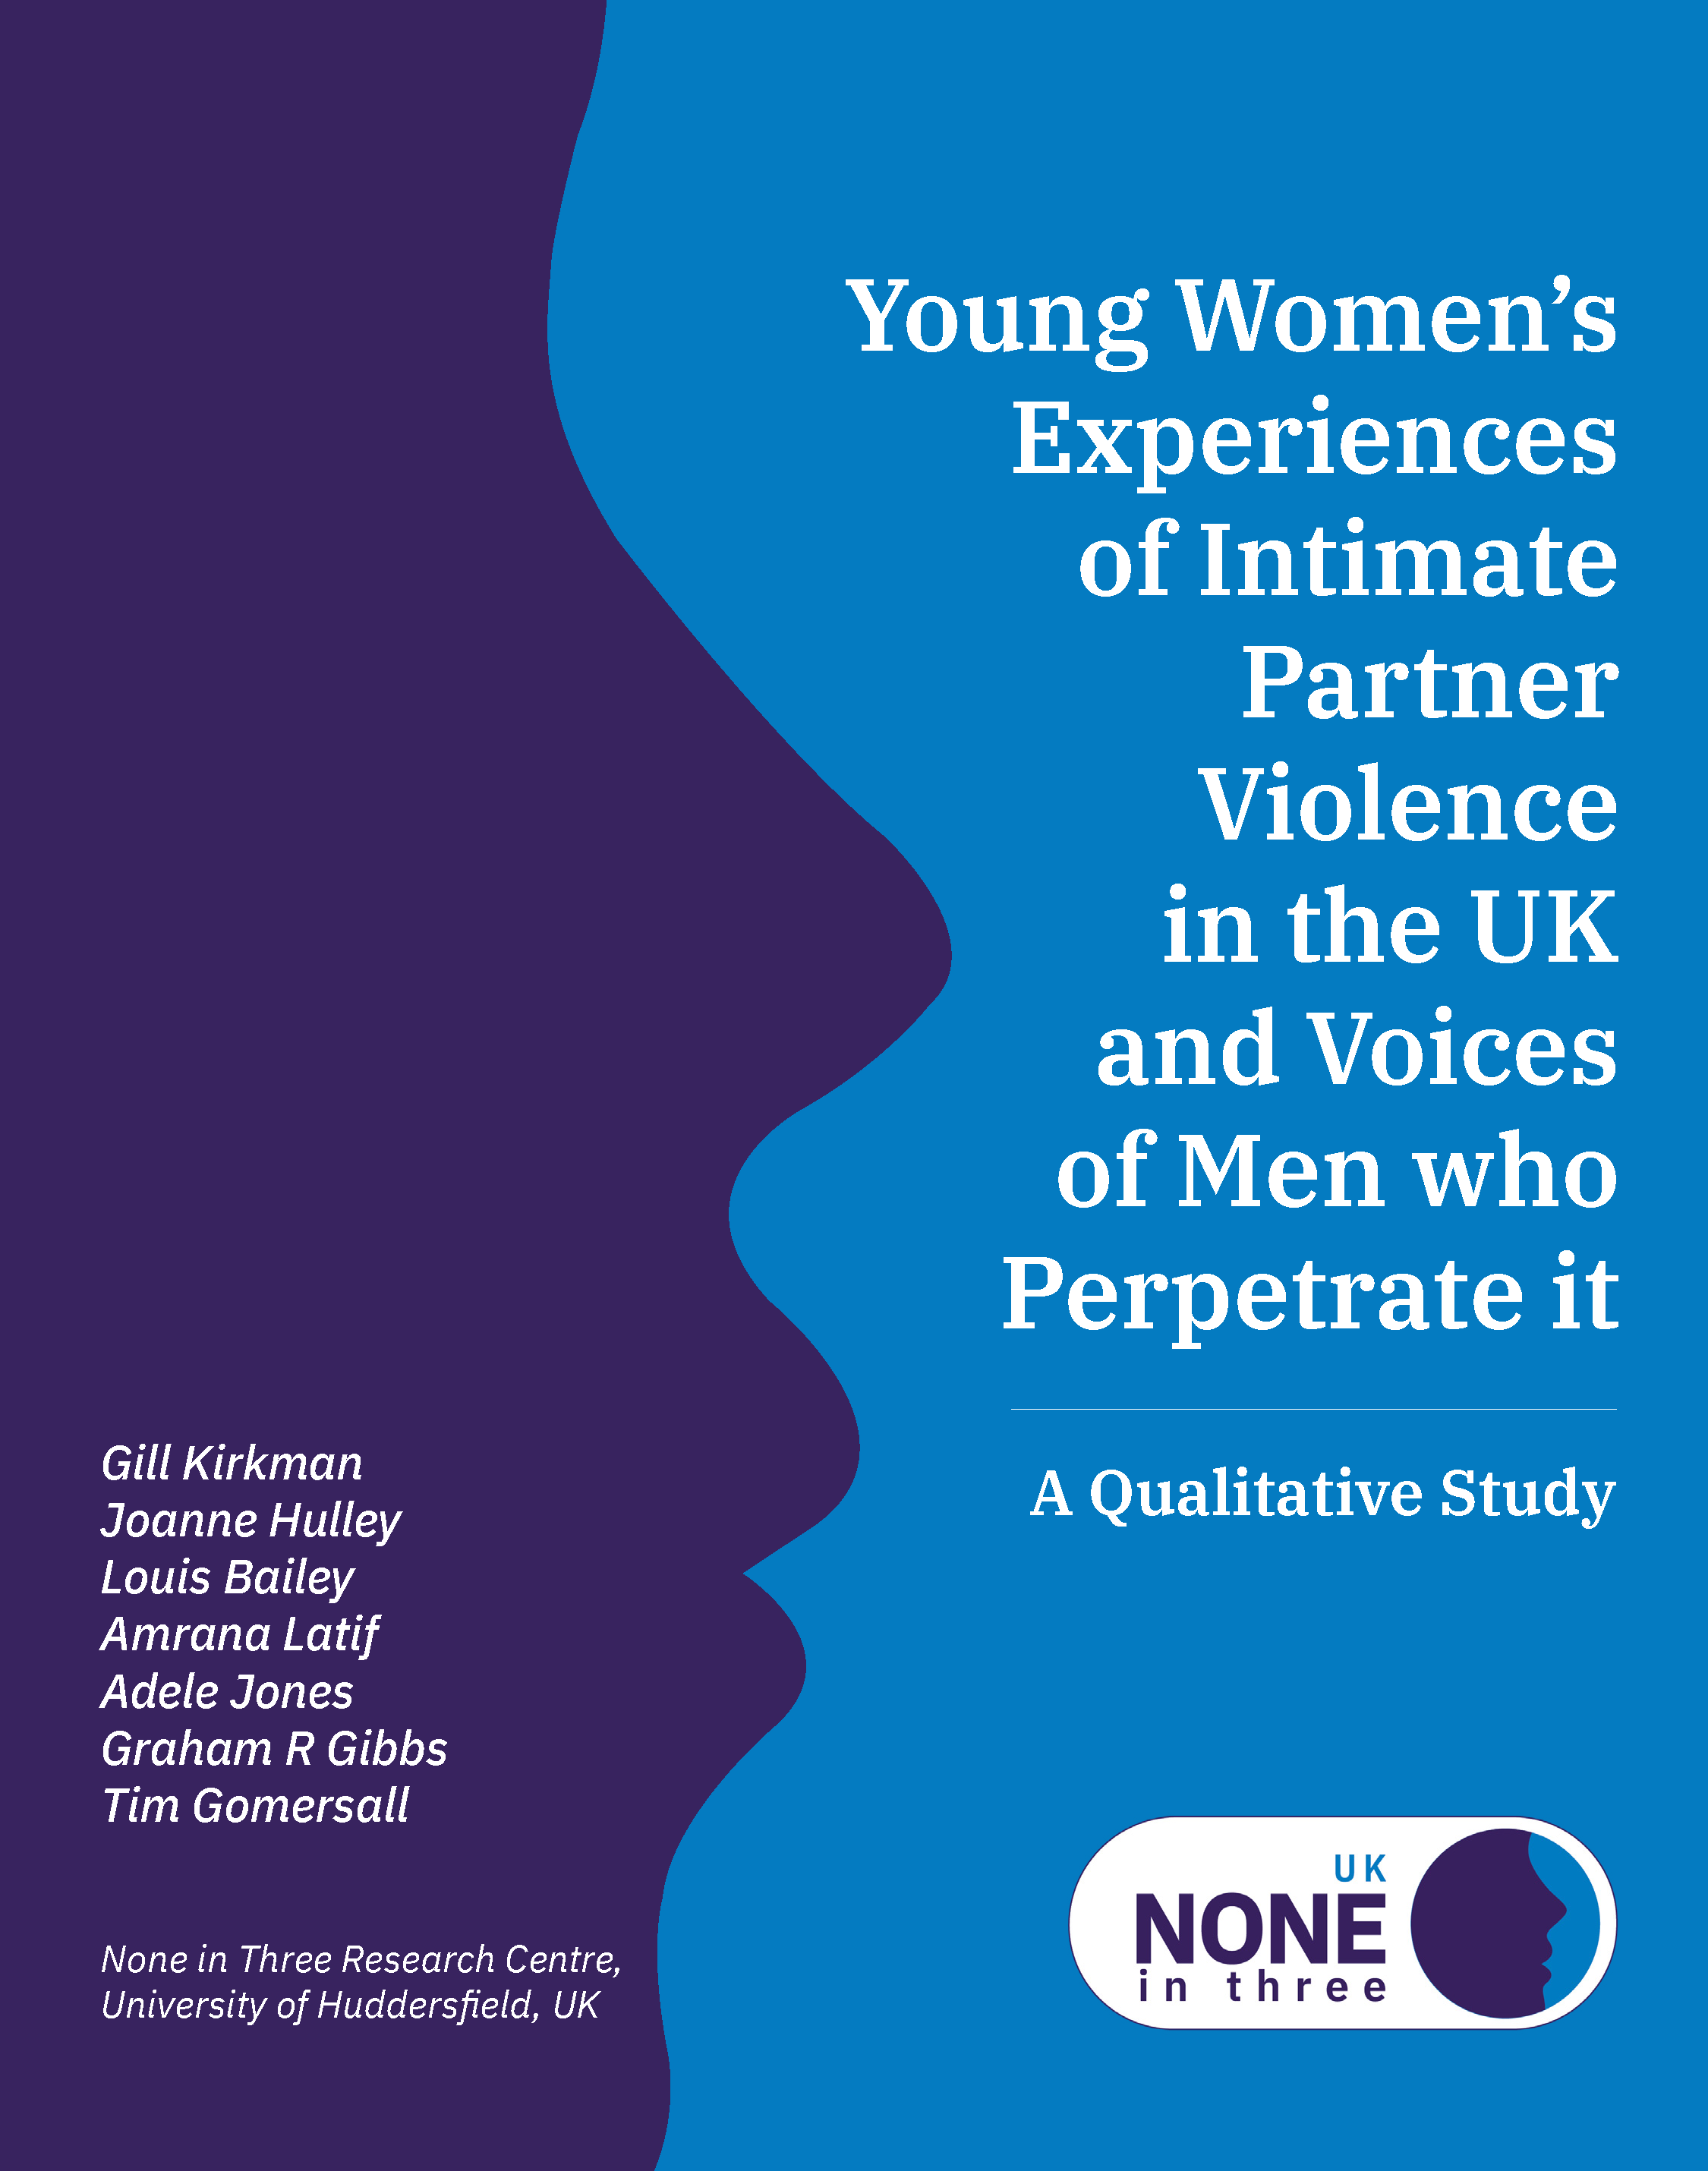 Front cover of qualitative report into intimate partner violence in the UK